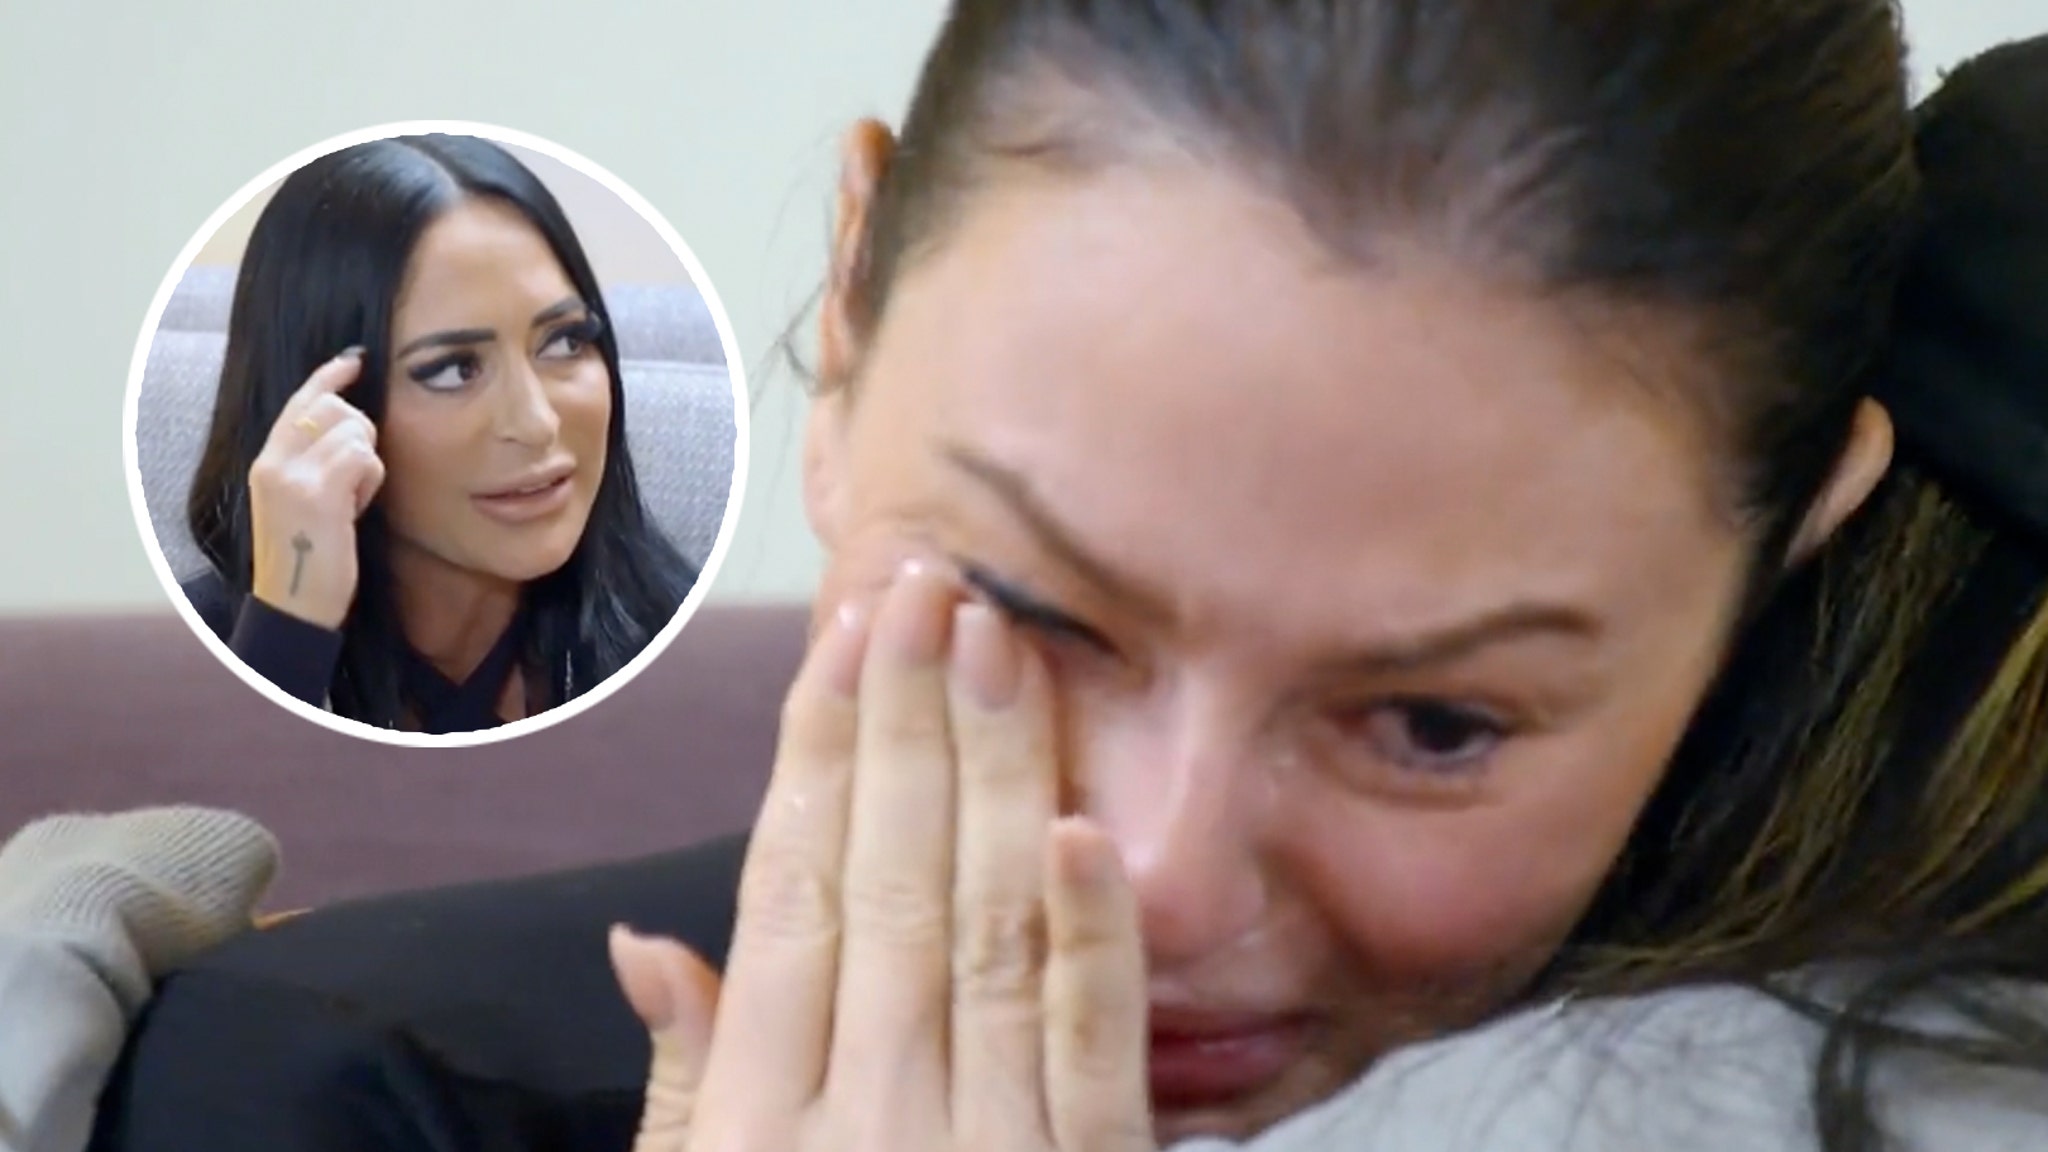 JWoww Breaks Down In Tears After Angelina Accuses Her of Ruining Engagement on Jersey Shore Finale